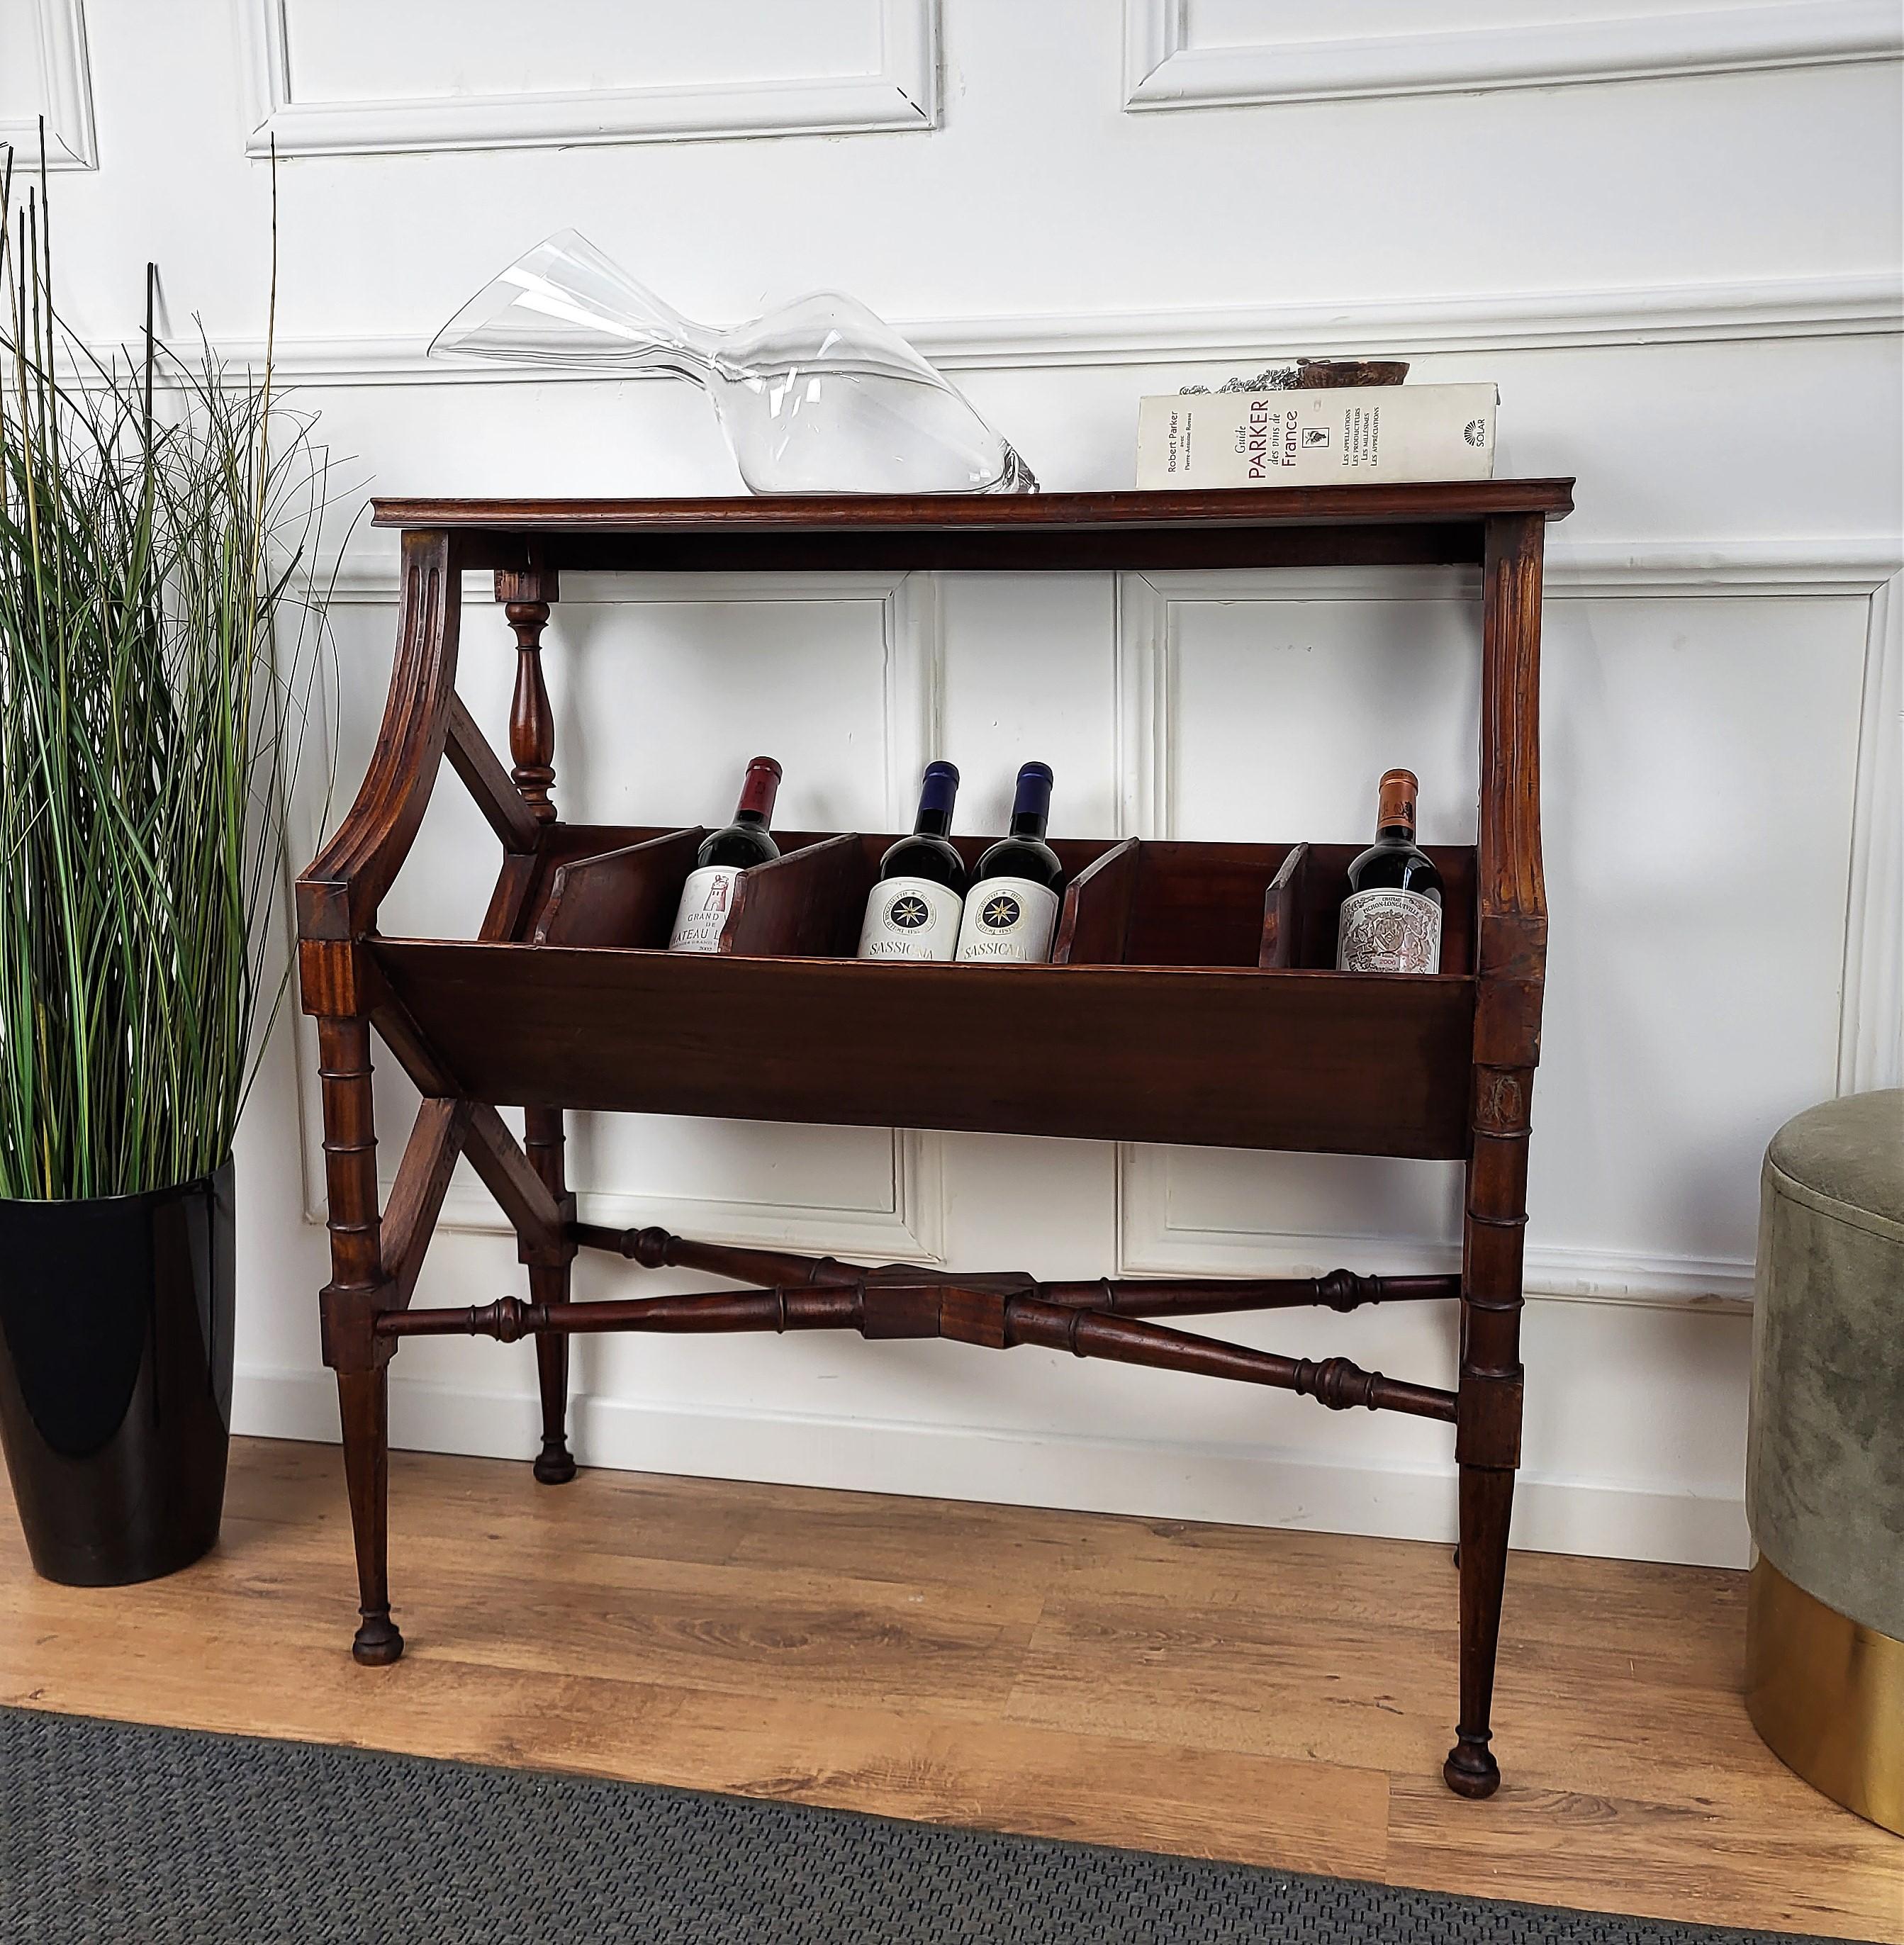 Very elegant Italian wallside table or cabinet, ideal as wine holder dry bar or side table with the various central compartments, completed with beautiful carved legs and connecting stretchers. Its unique and typical design and shapes make this a